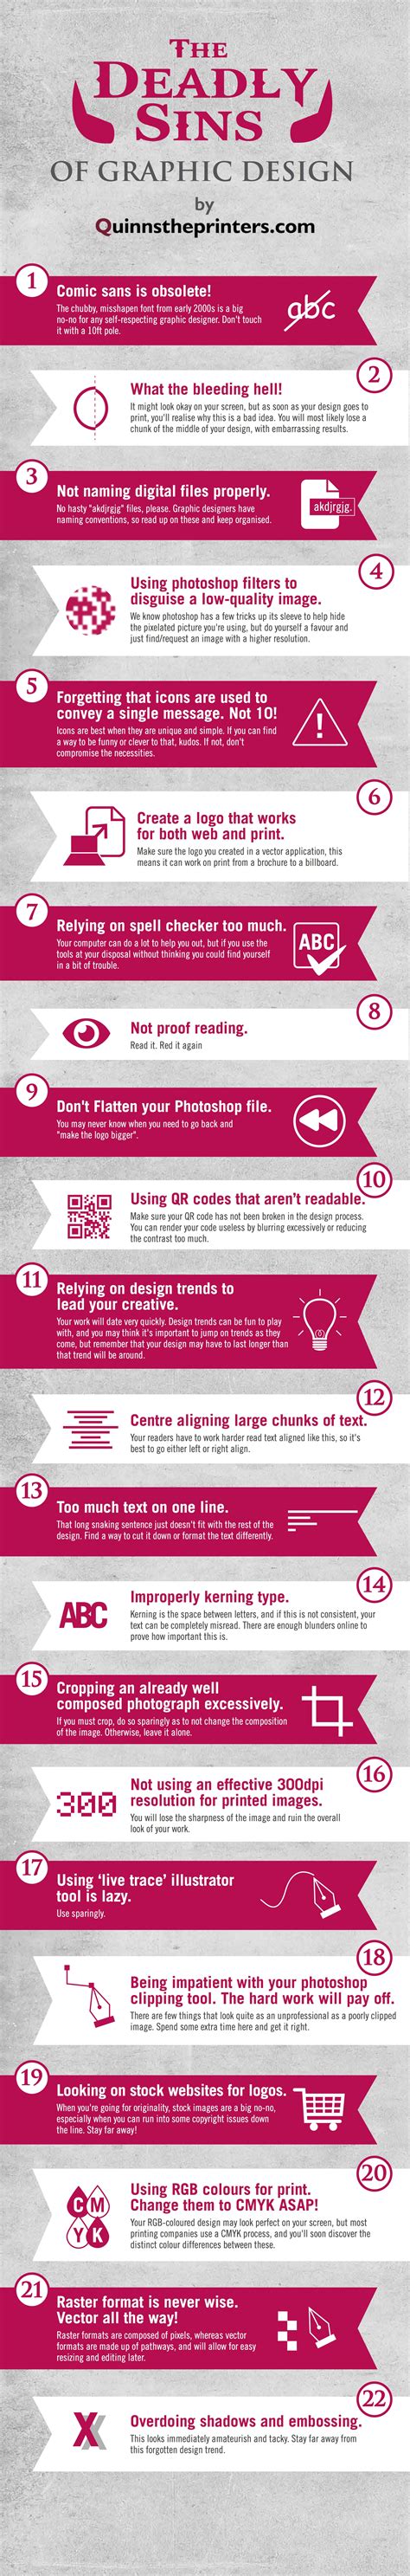 The 22 Deadly Sins Of Graphic Design That You Should Be Wary Of